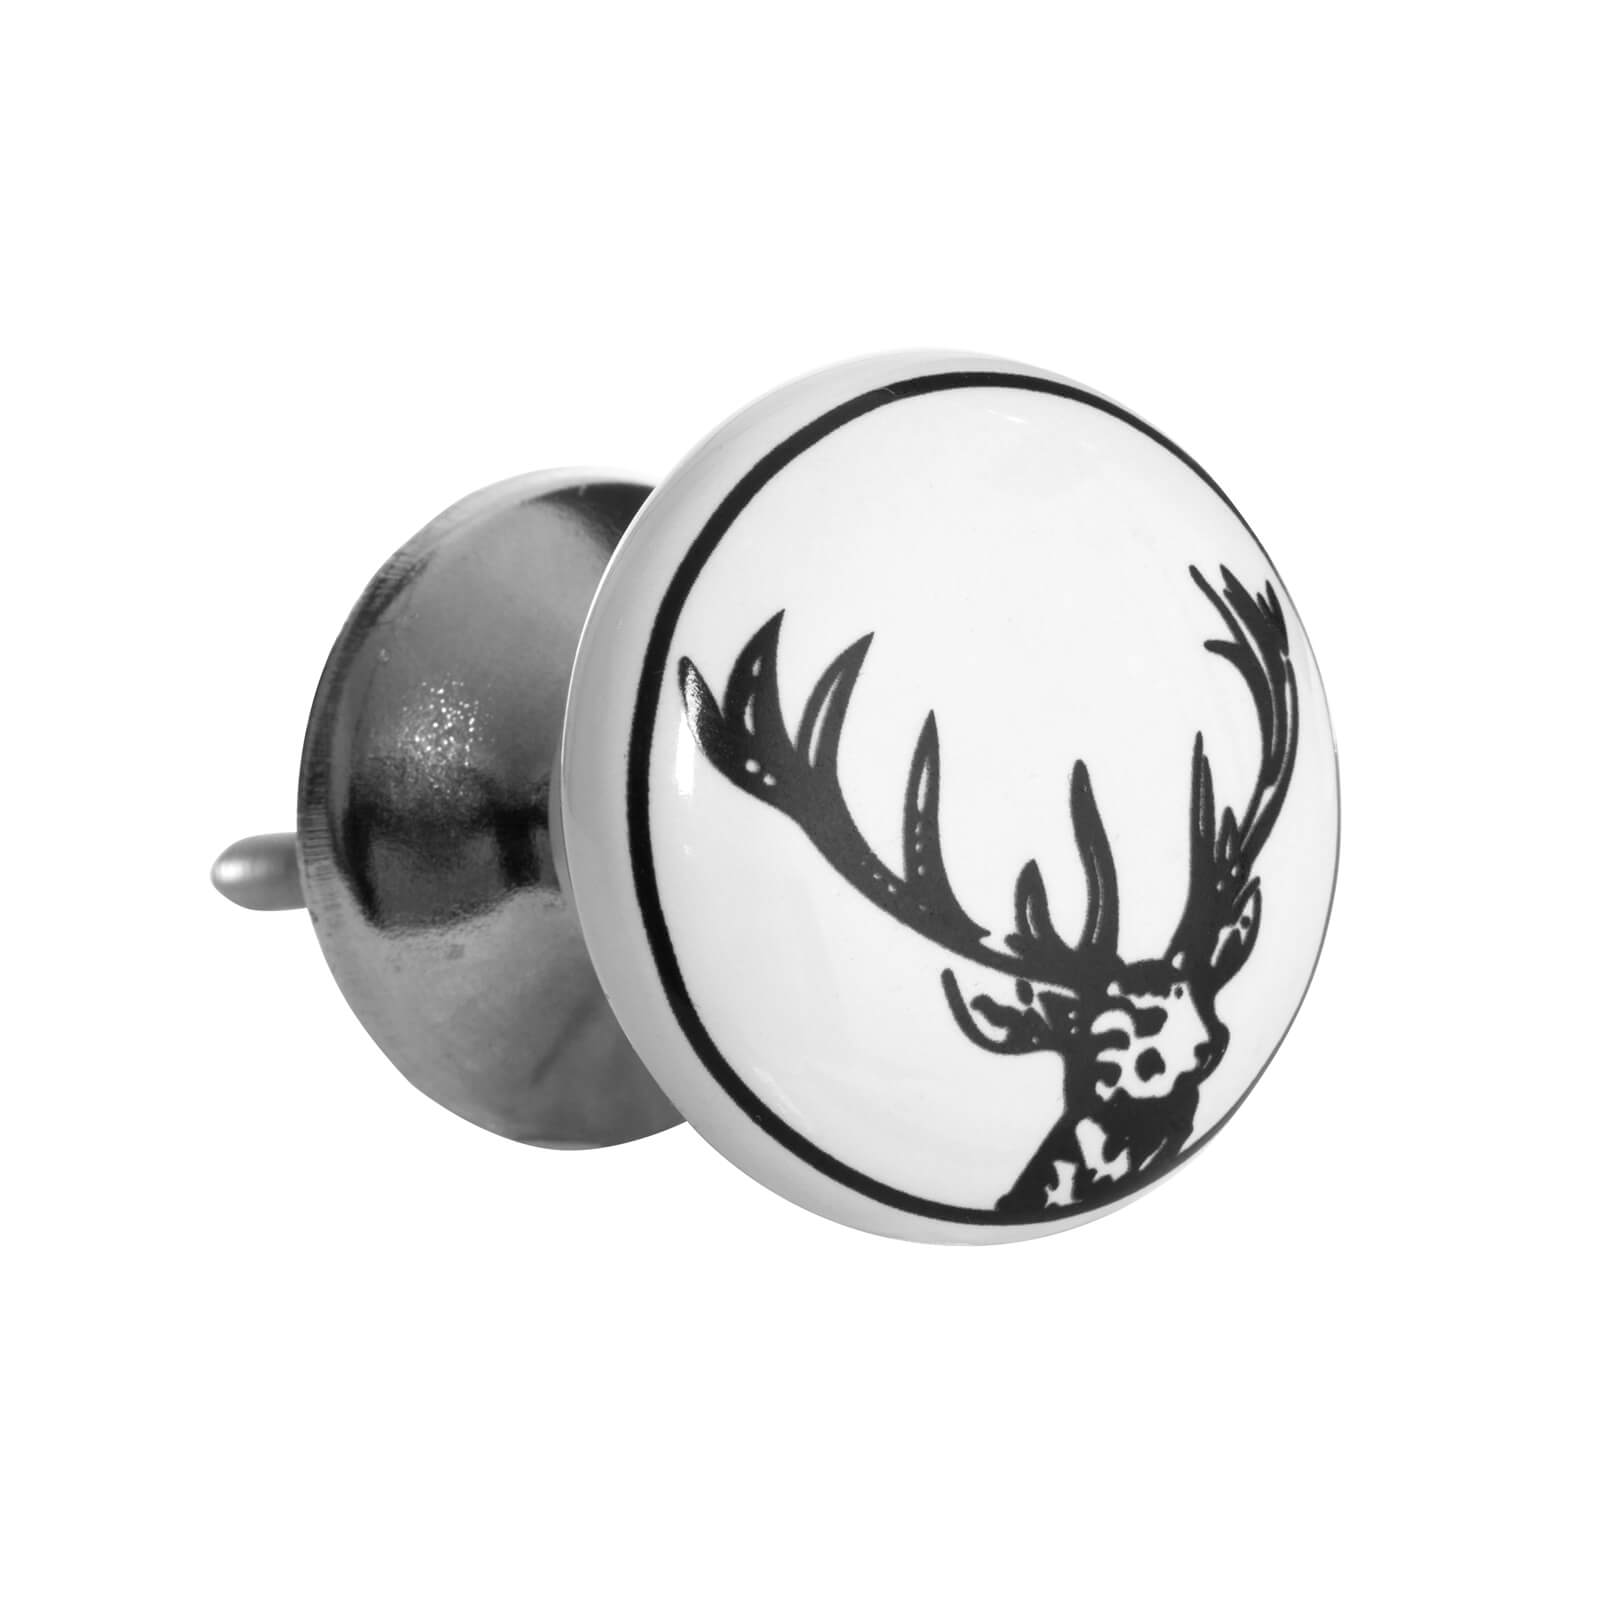 Stag Head Drawer Knobs - Set of 4